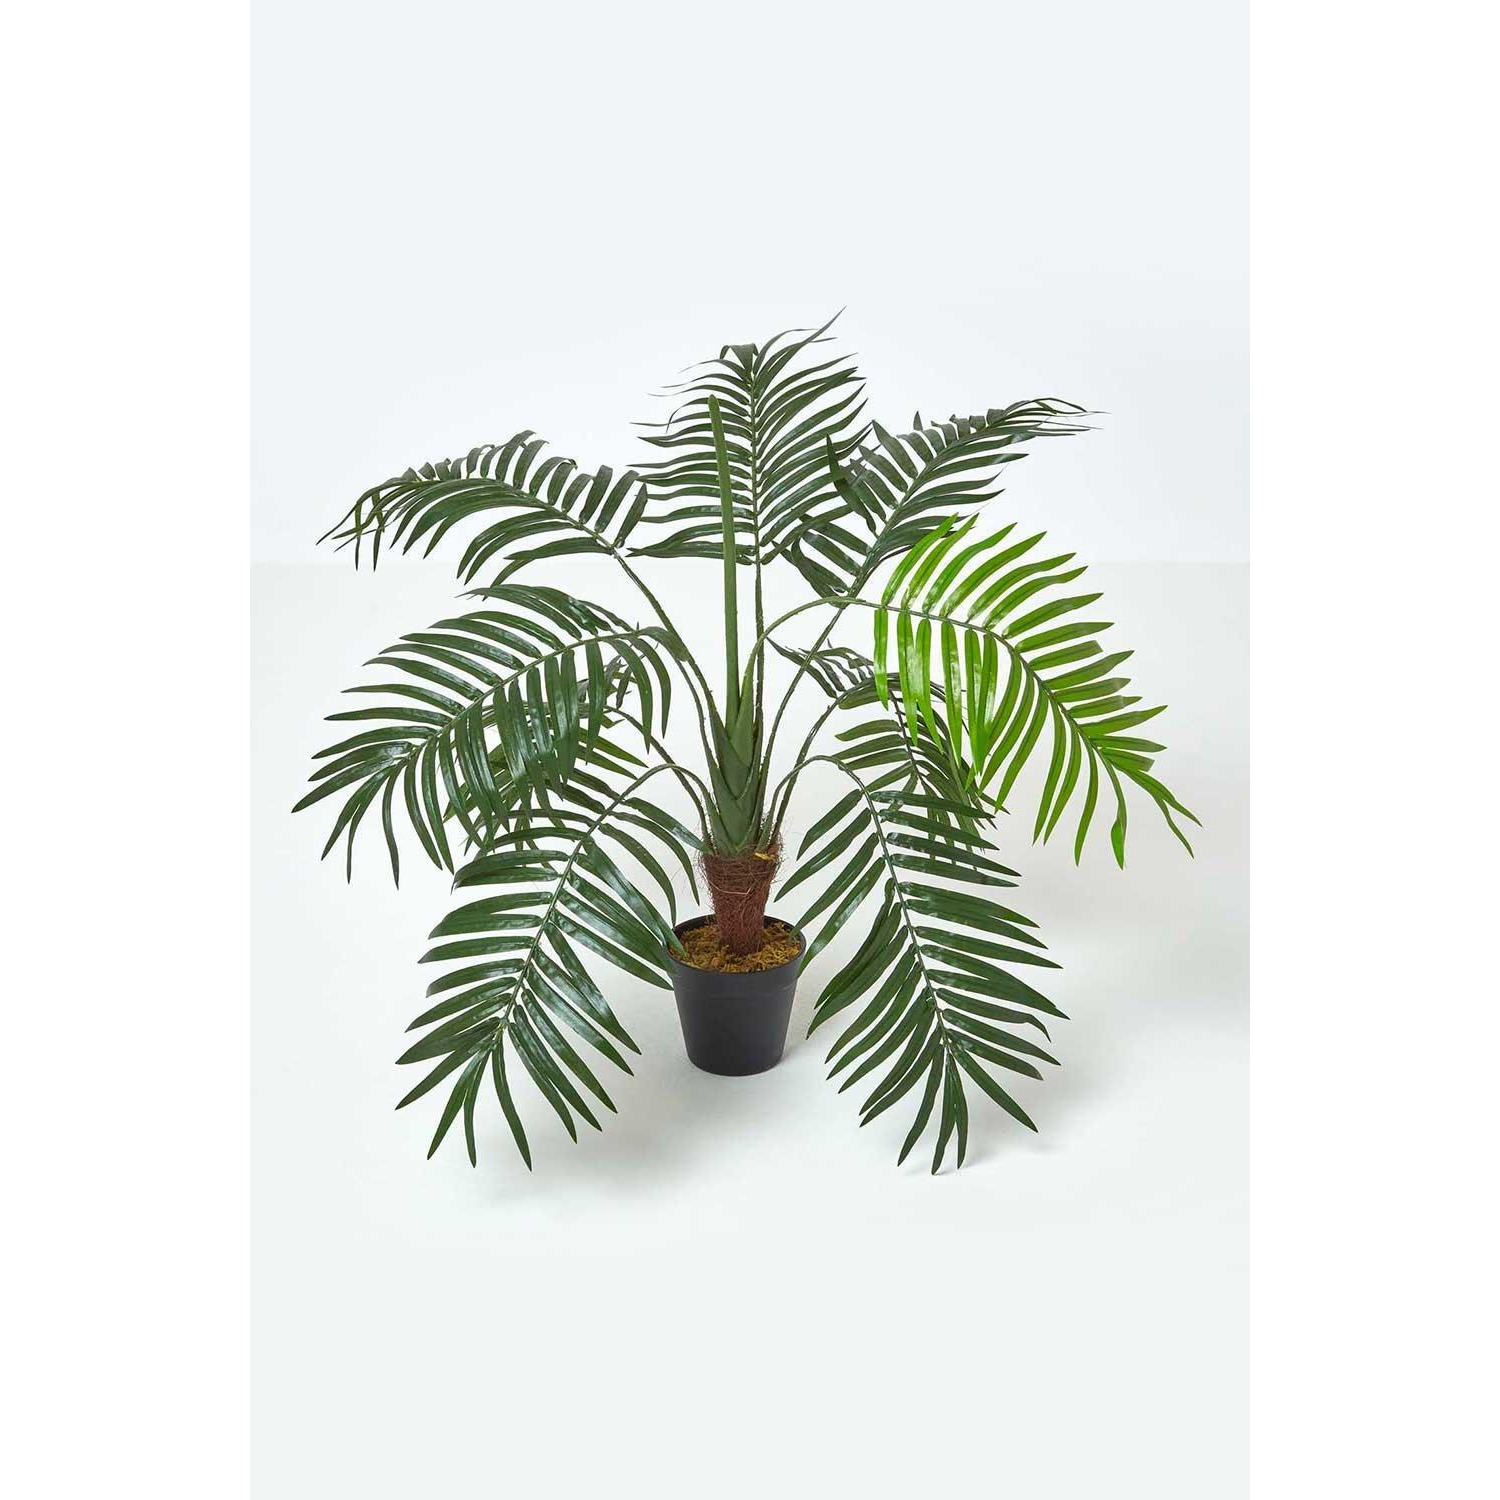 Green Mini Palm Tree Artificial Plant with Pot, 70 cm - image 1